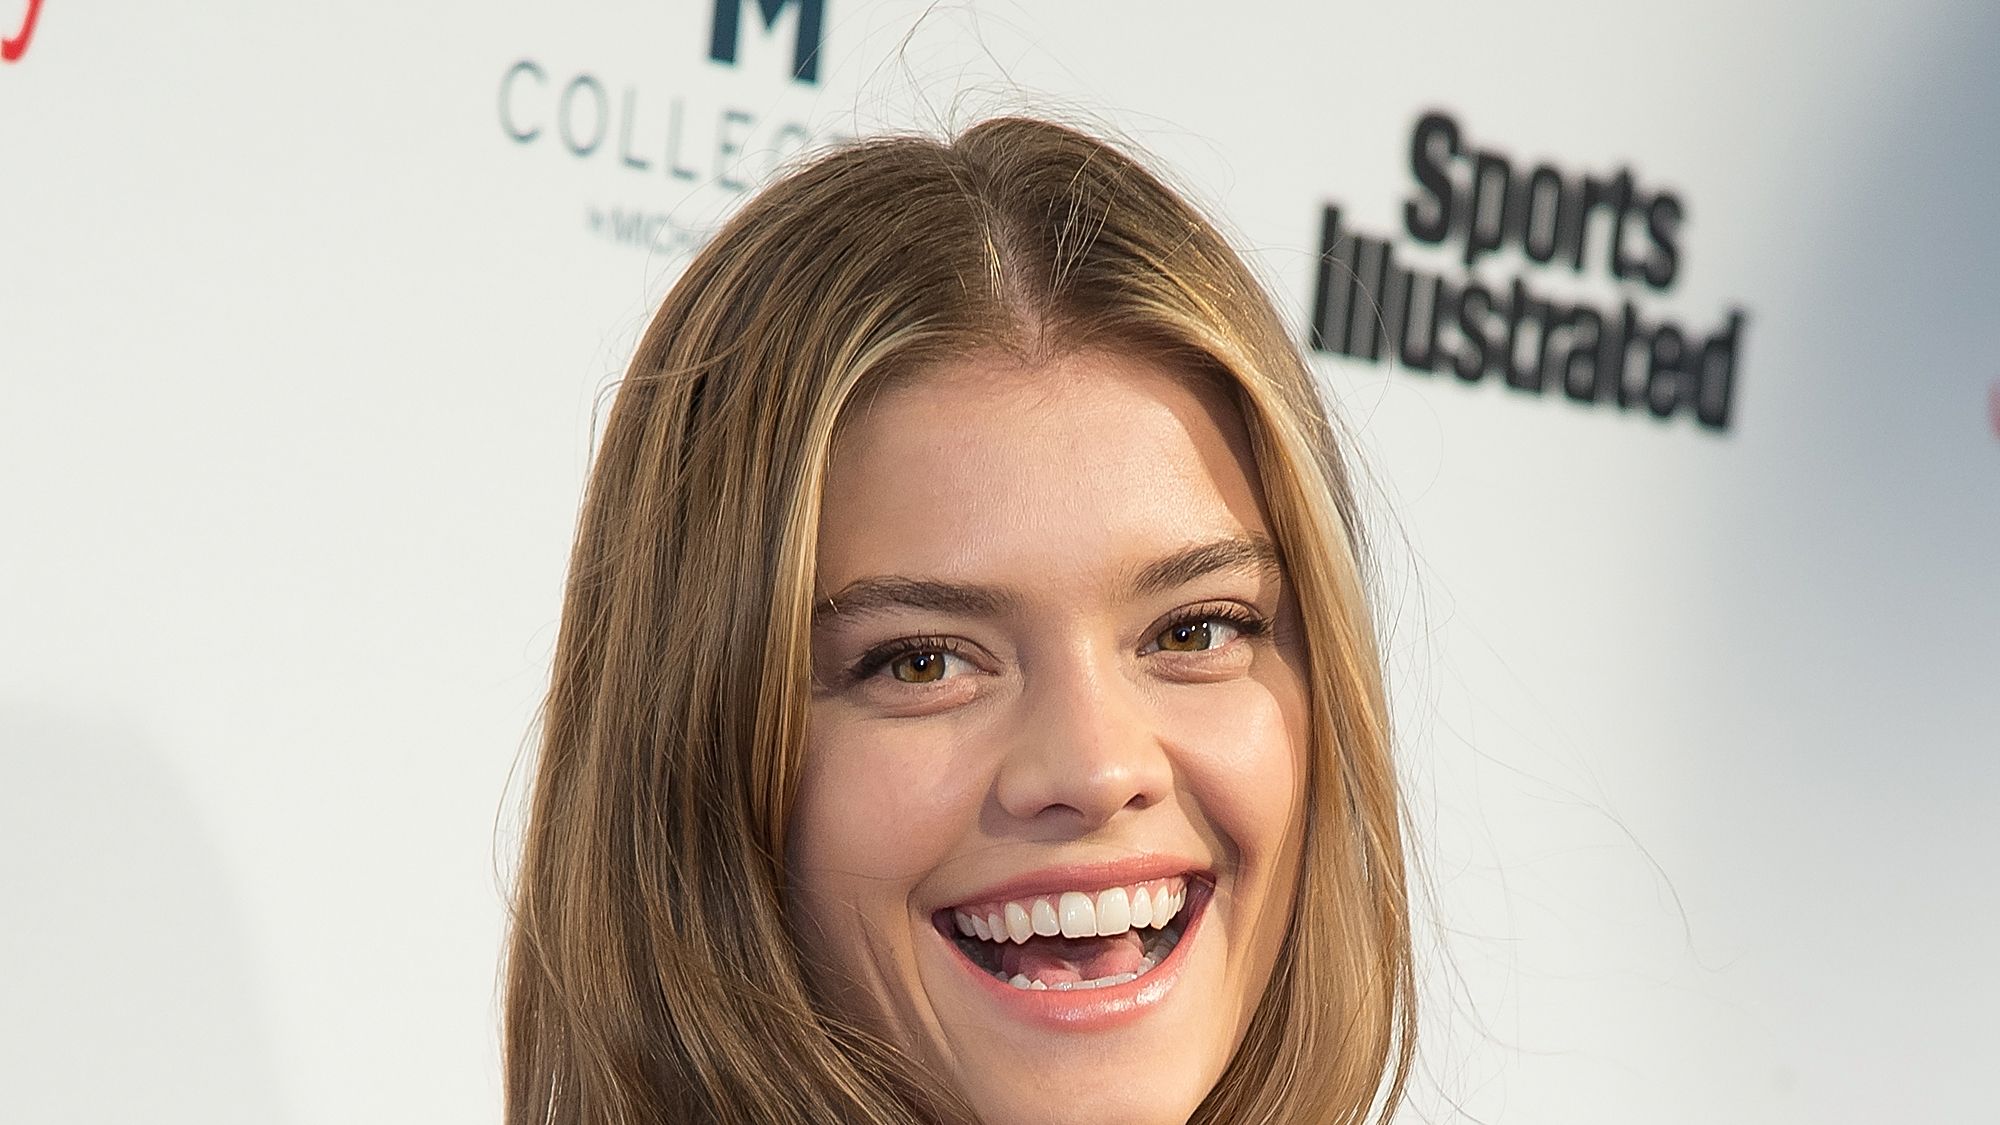 Nina Agdal Rocks Chiseled Abs In A Crop Top IG Photo